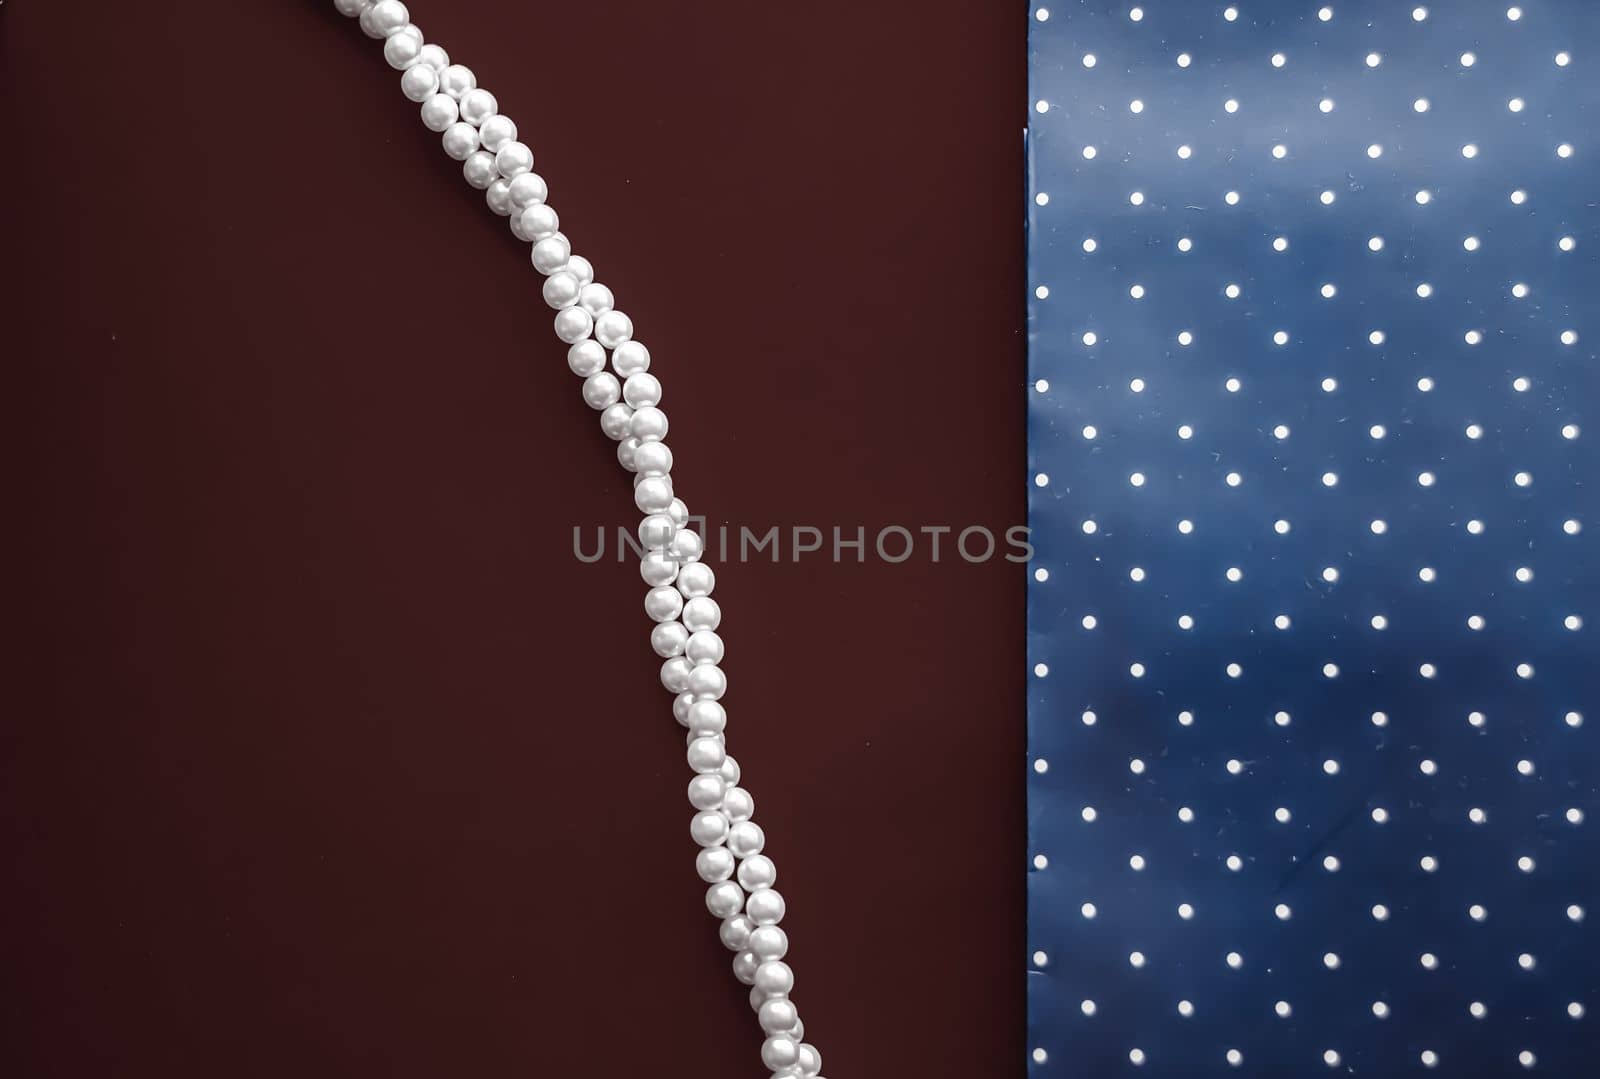 Pearl jewellery necklace and abstract blue polka dot background on chocolate backdrop by Anneleven